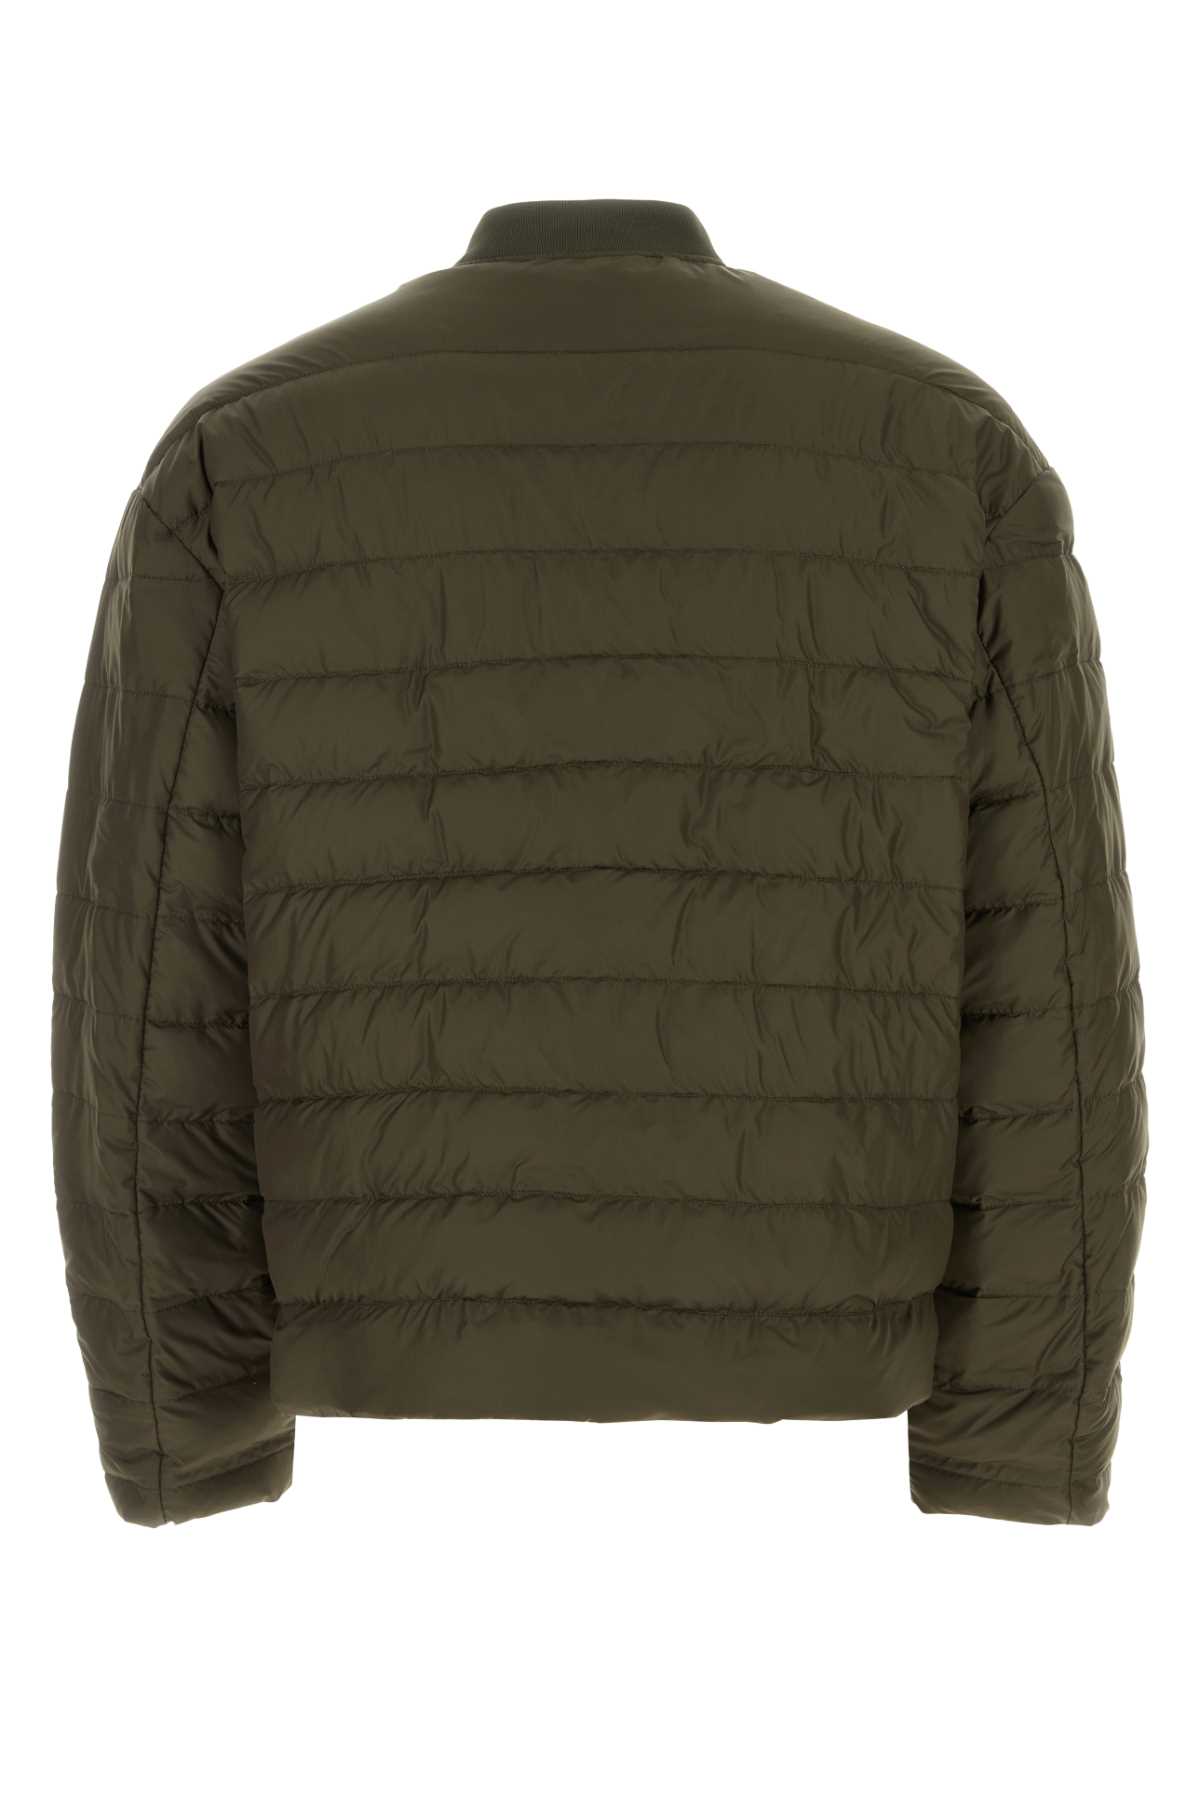 Prada Army Green Polyester Down Jacket In Militare